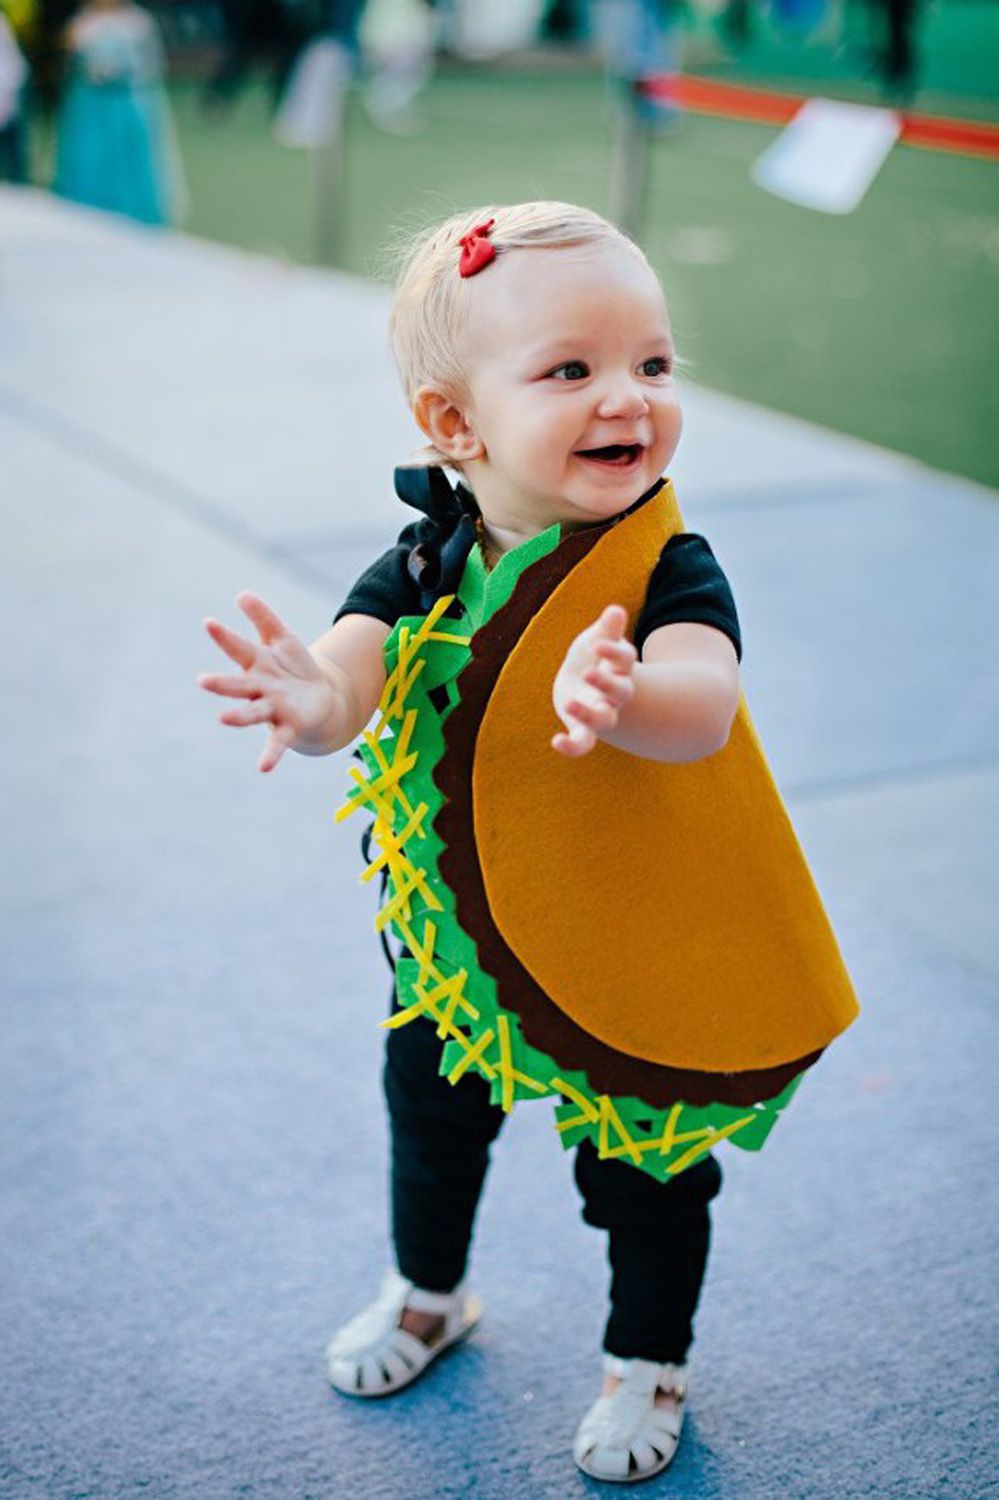 14 Cute Toddler Halloween Costumes - Fun Costume Ideas for Toddlers